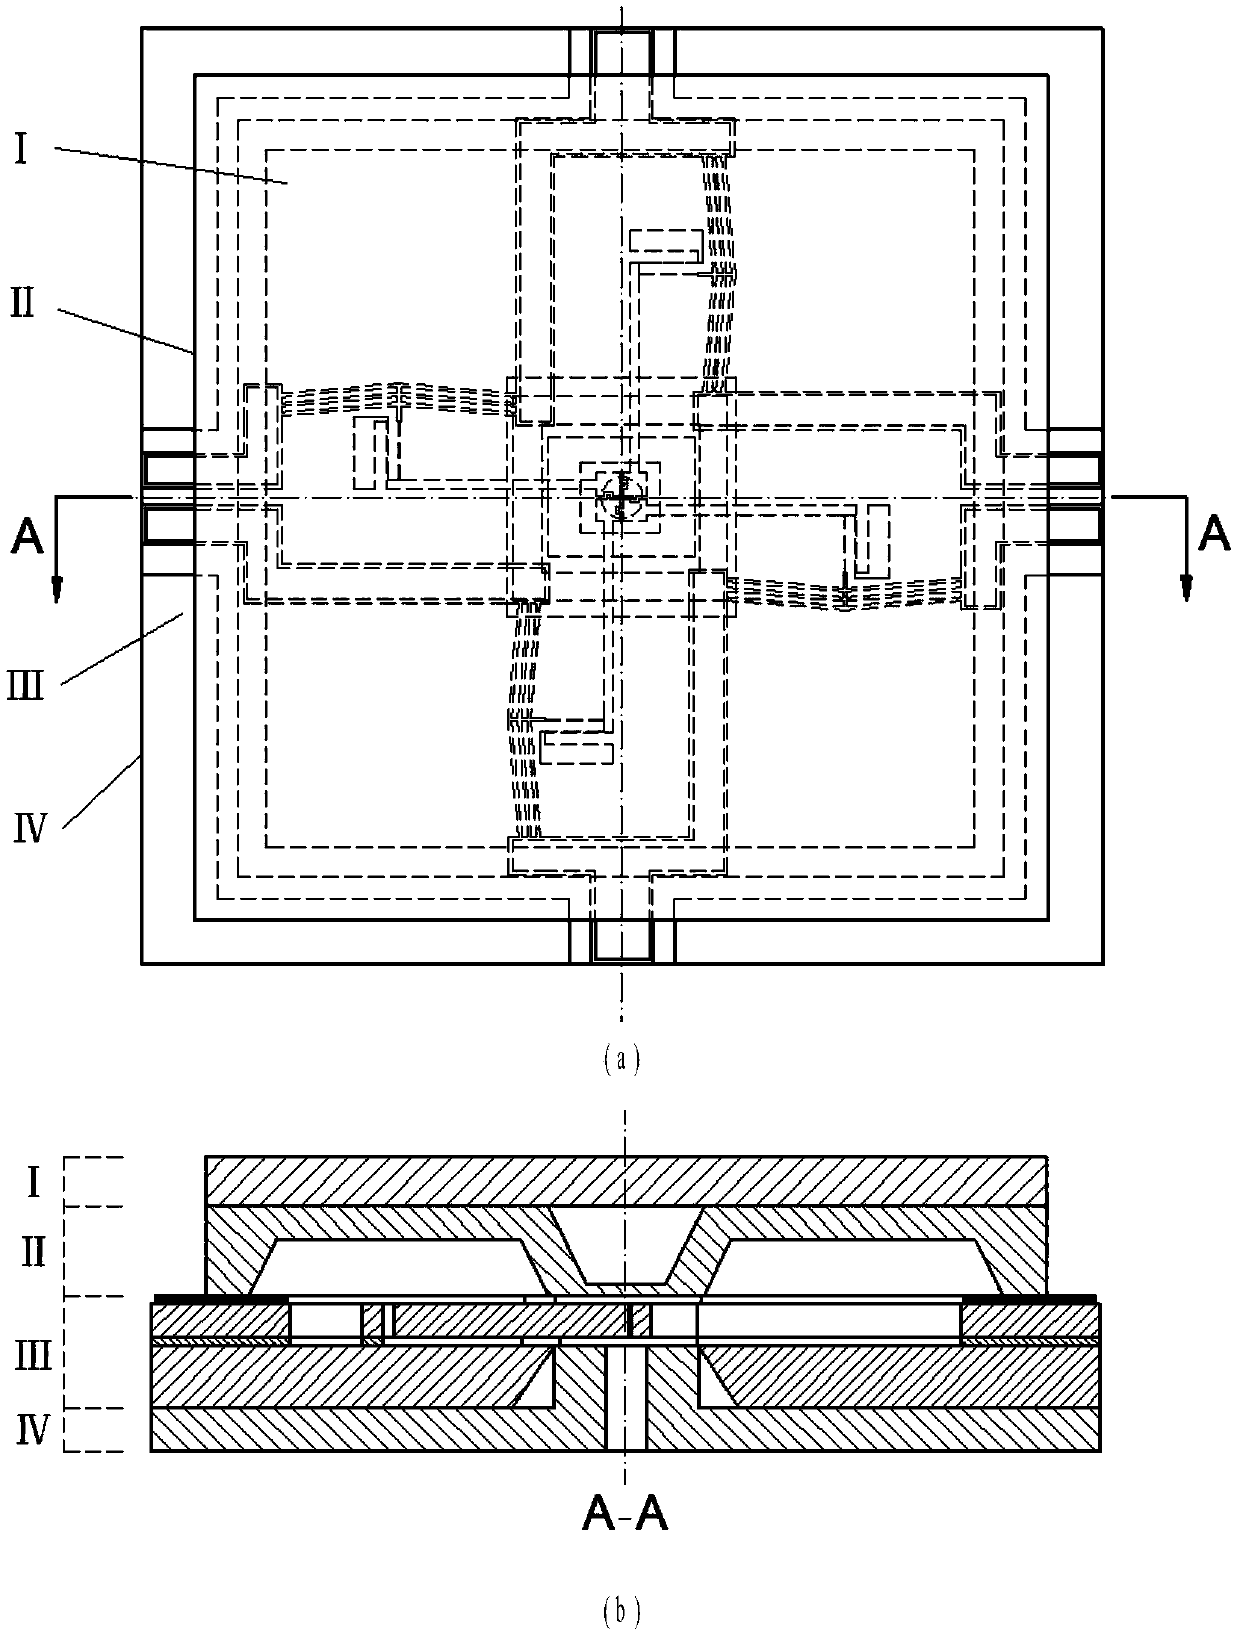 Partition-type micro-electromechanical system (MEMS) fuze